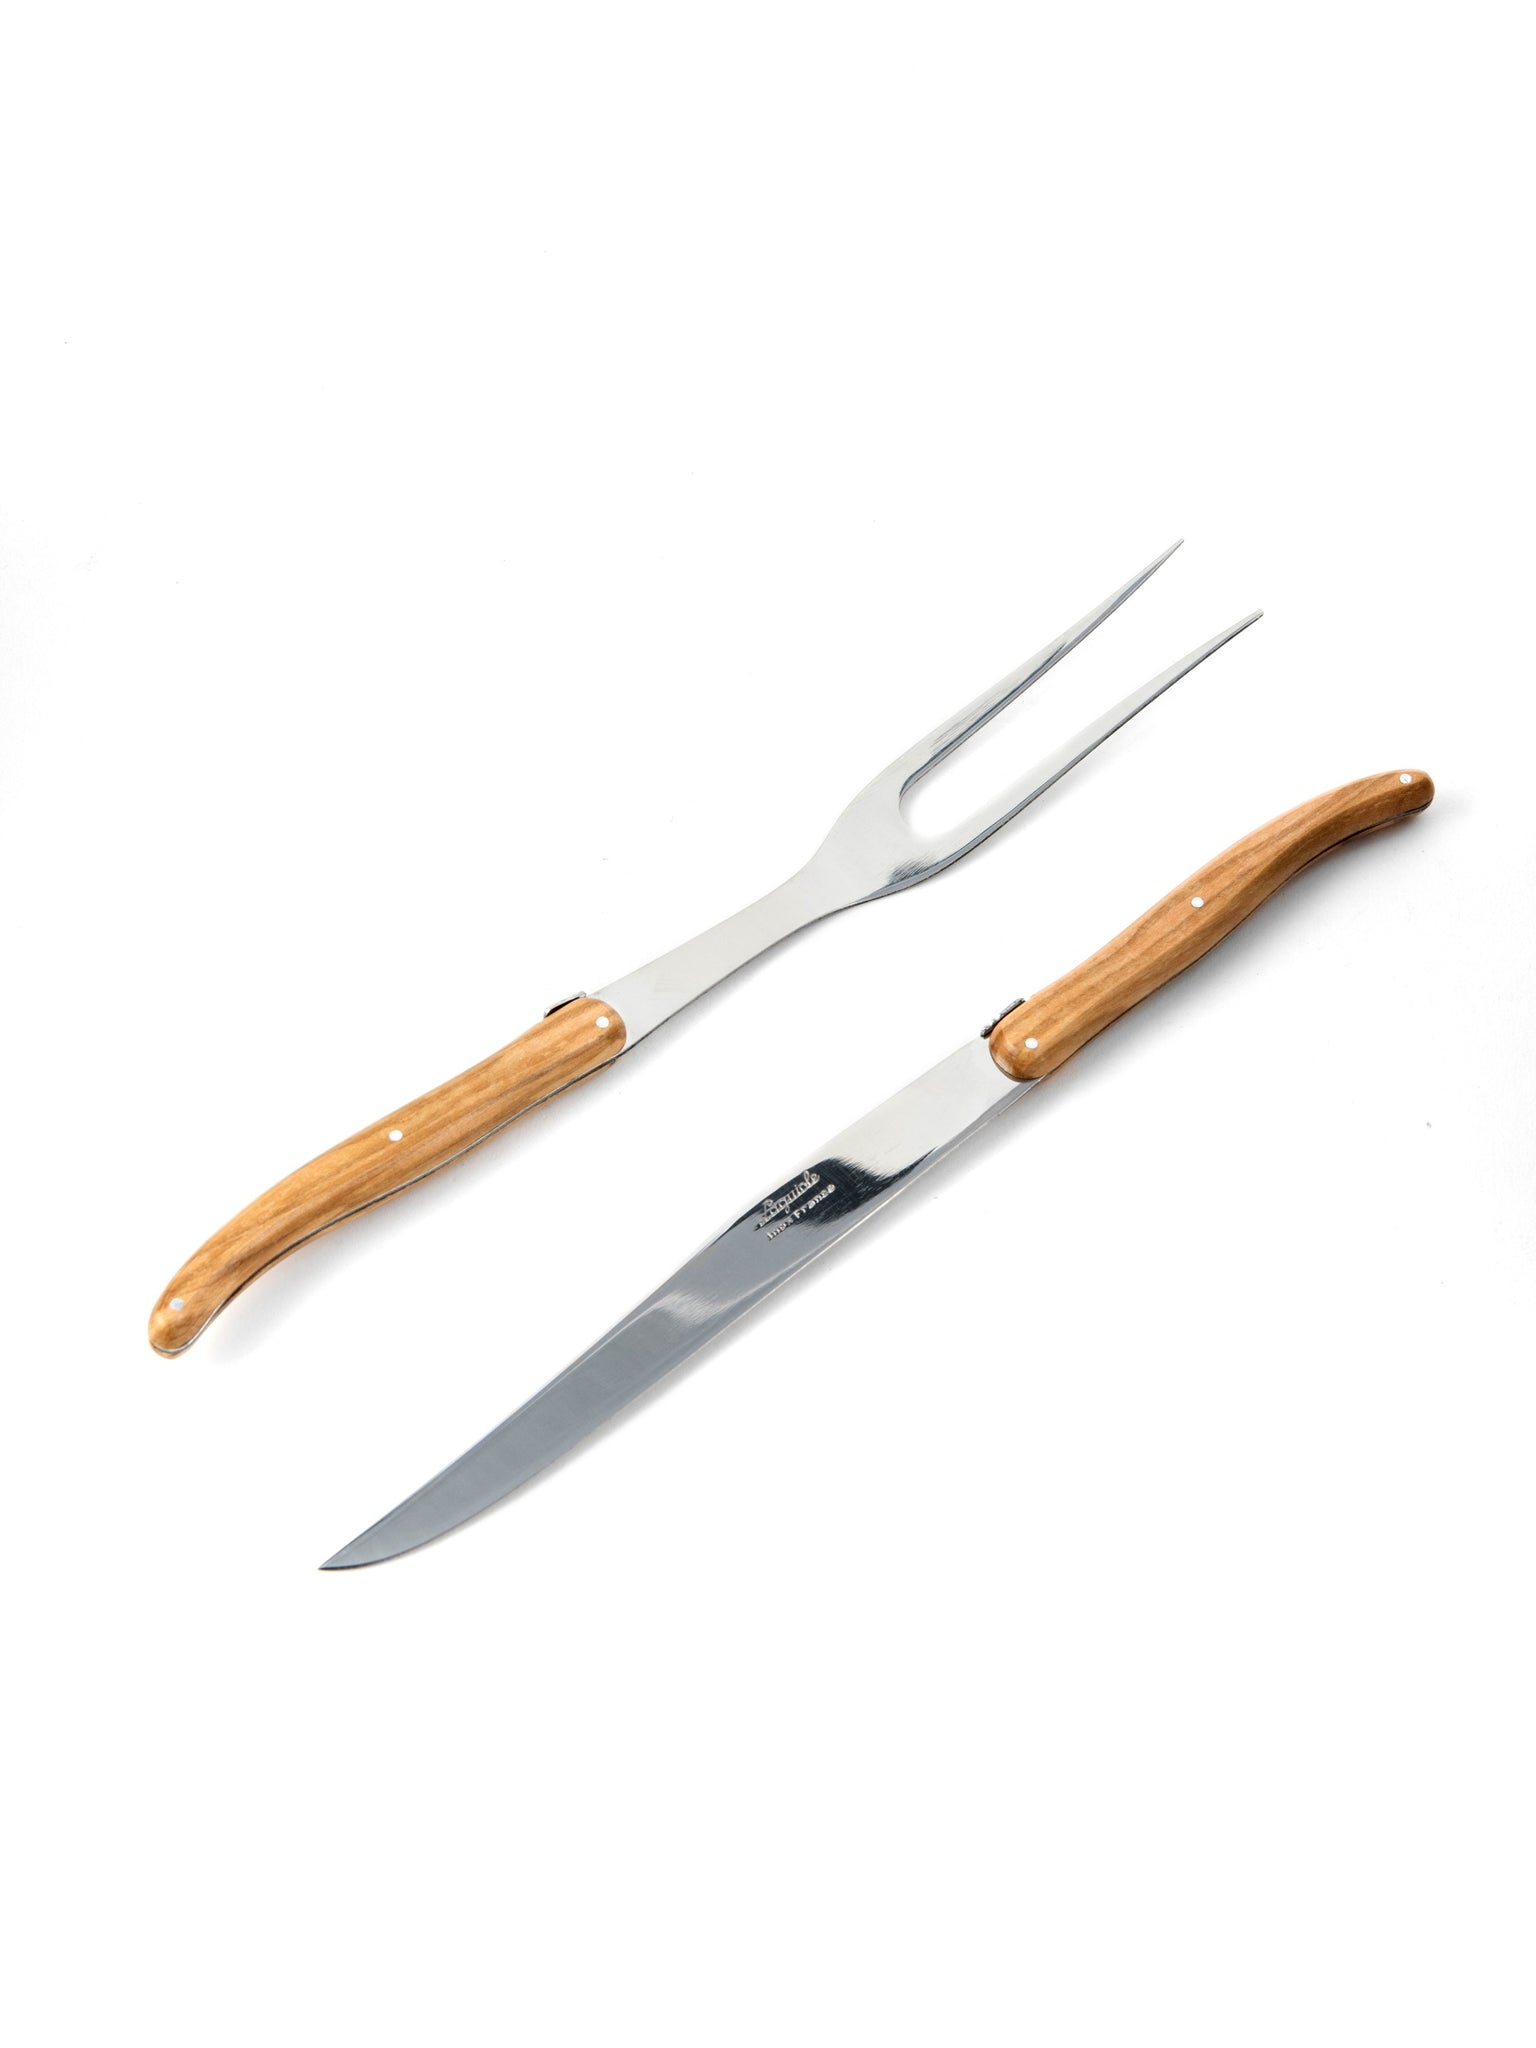 Laguiole French Olivewood Carving Set in Wood Box (Carving Knife and Carving Fork) - French Dry Goods